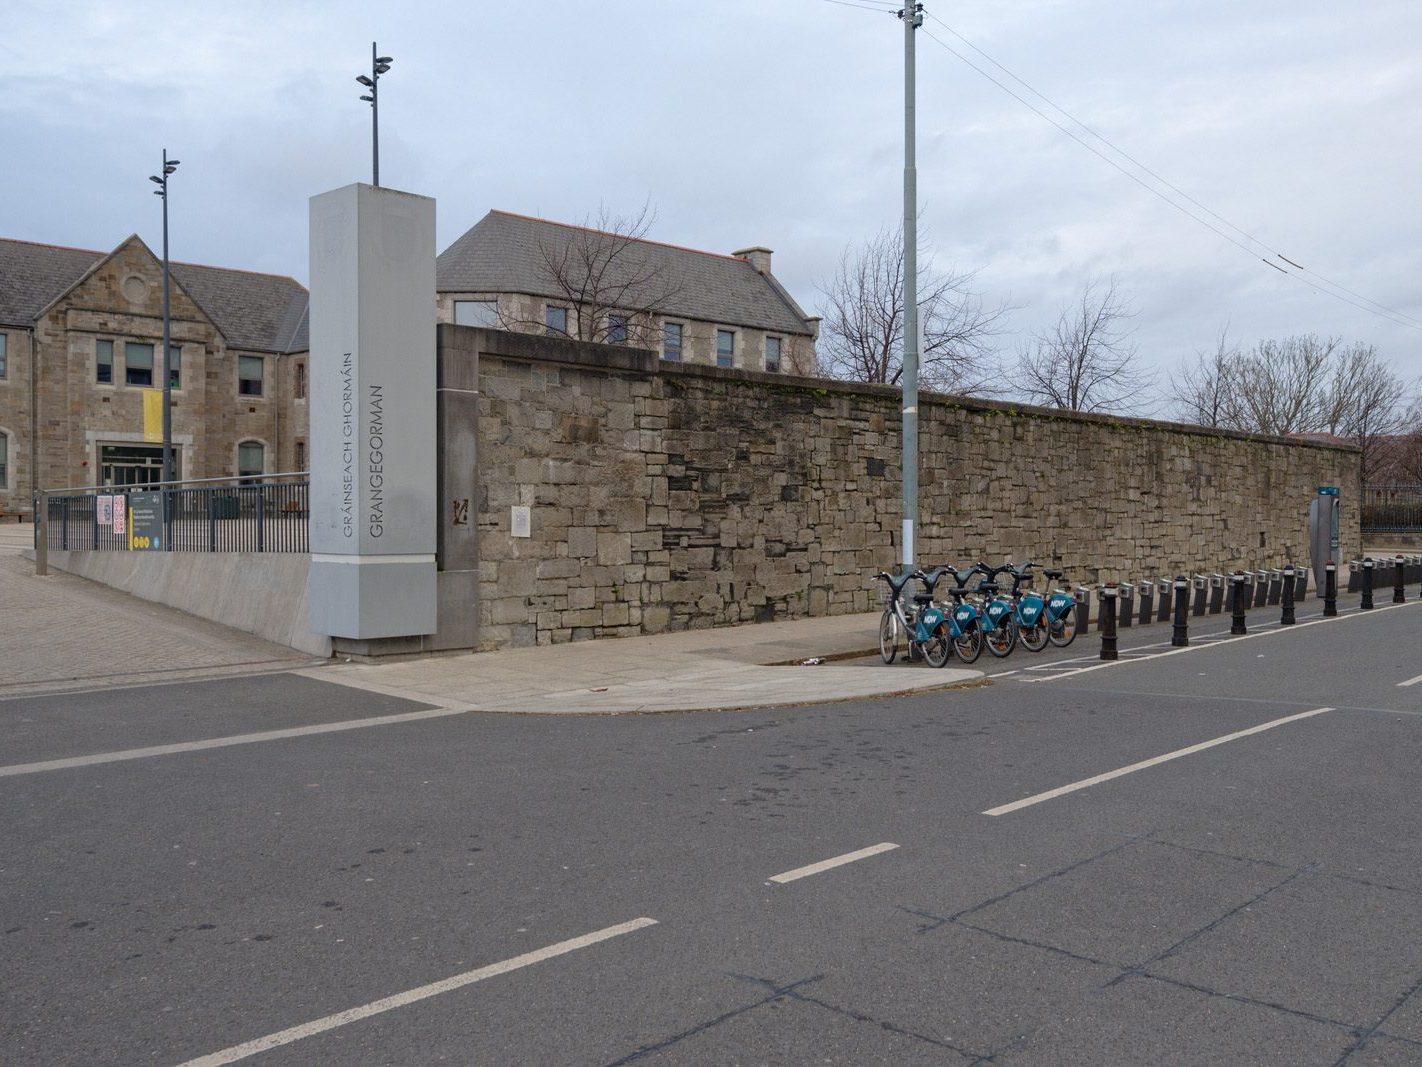 I VISITED THE GRANGEGORMAN UNIVERSITY CAMPUS [THERE WAS NO SIGN OF CHRISTMAS CELEBRATIONS THERE]-226040-1